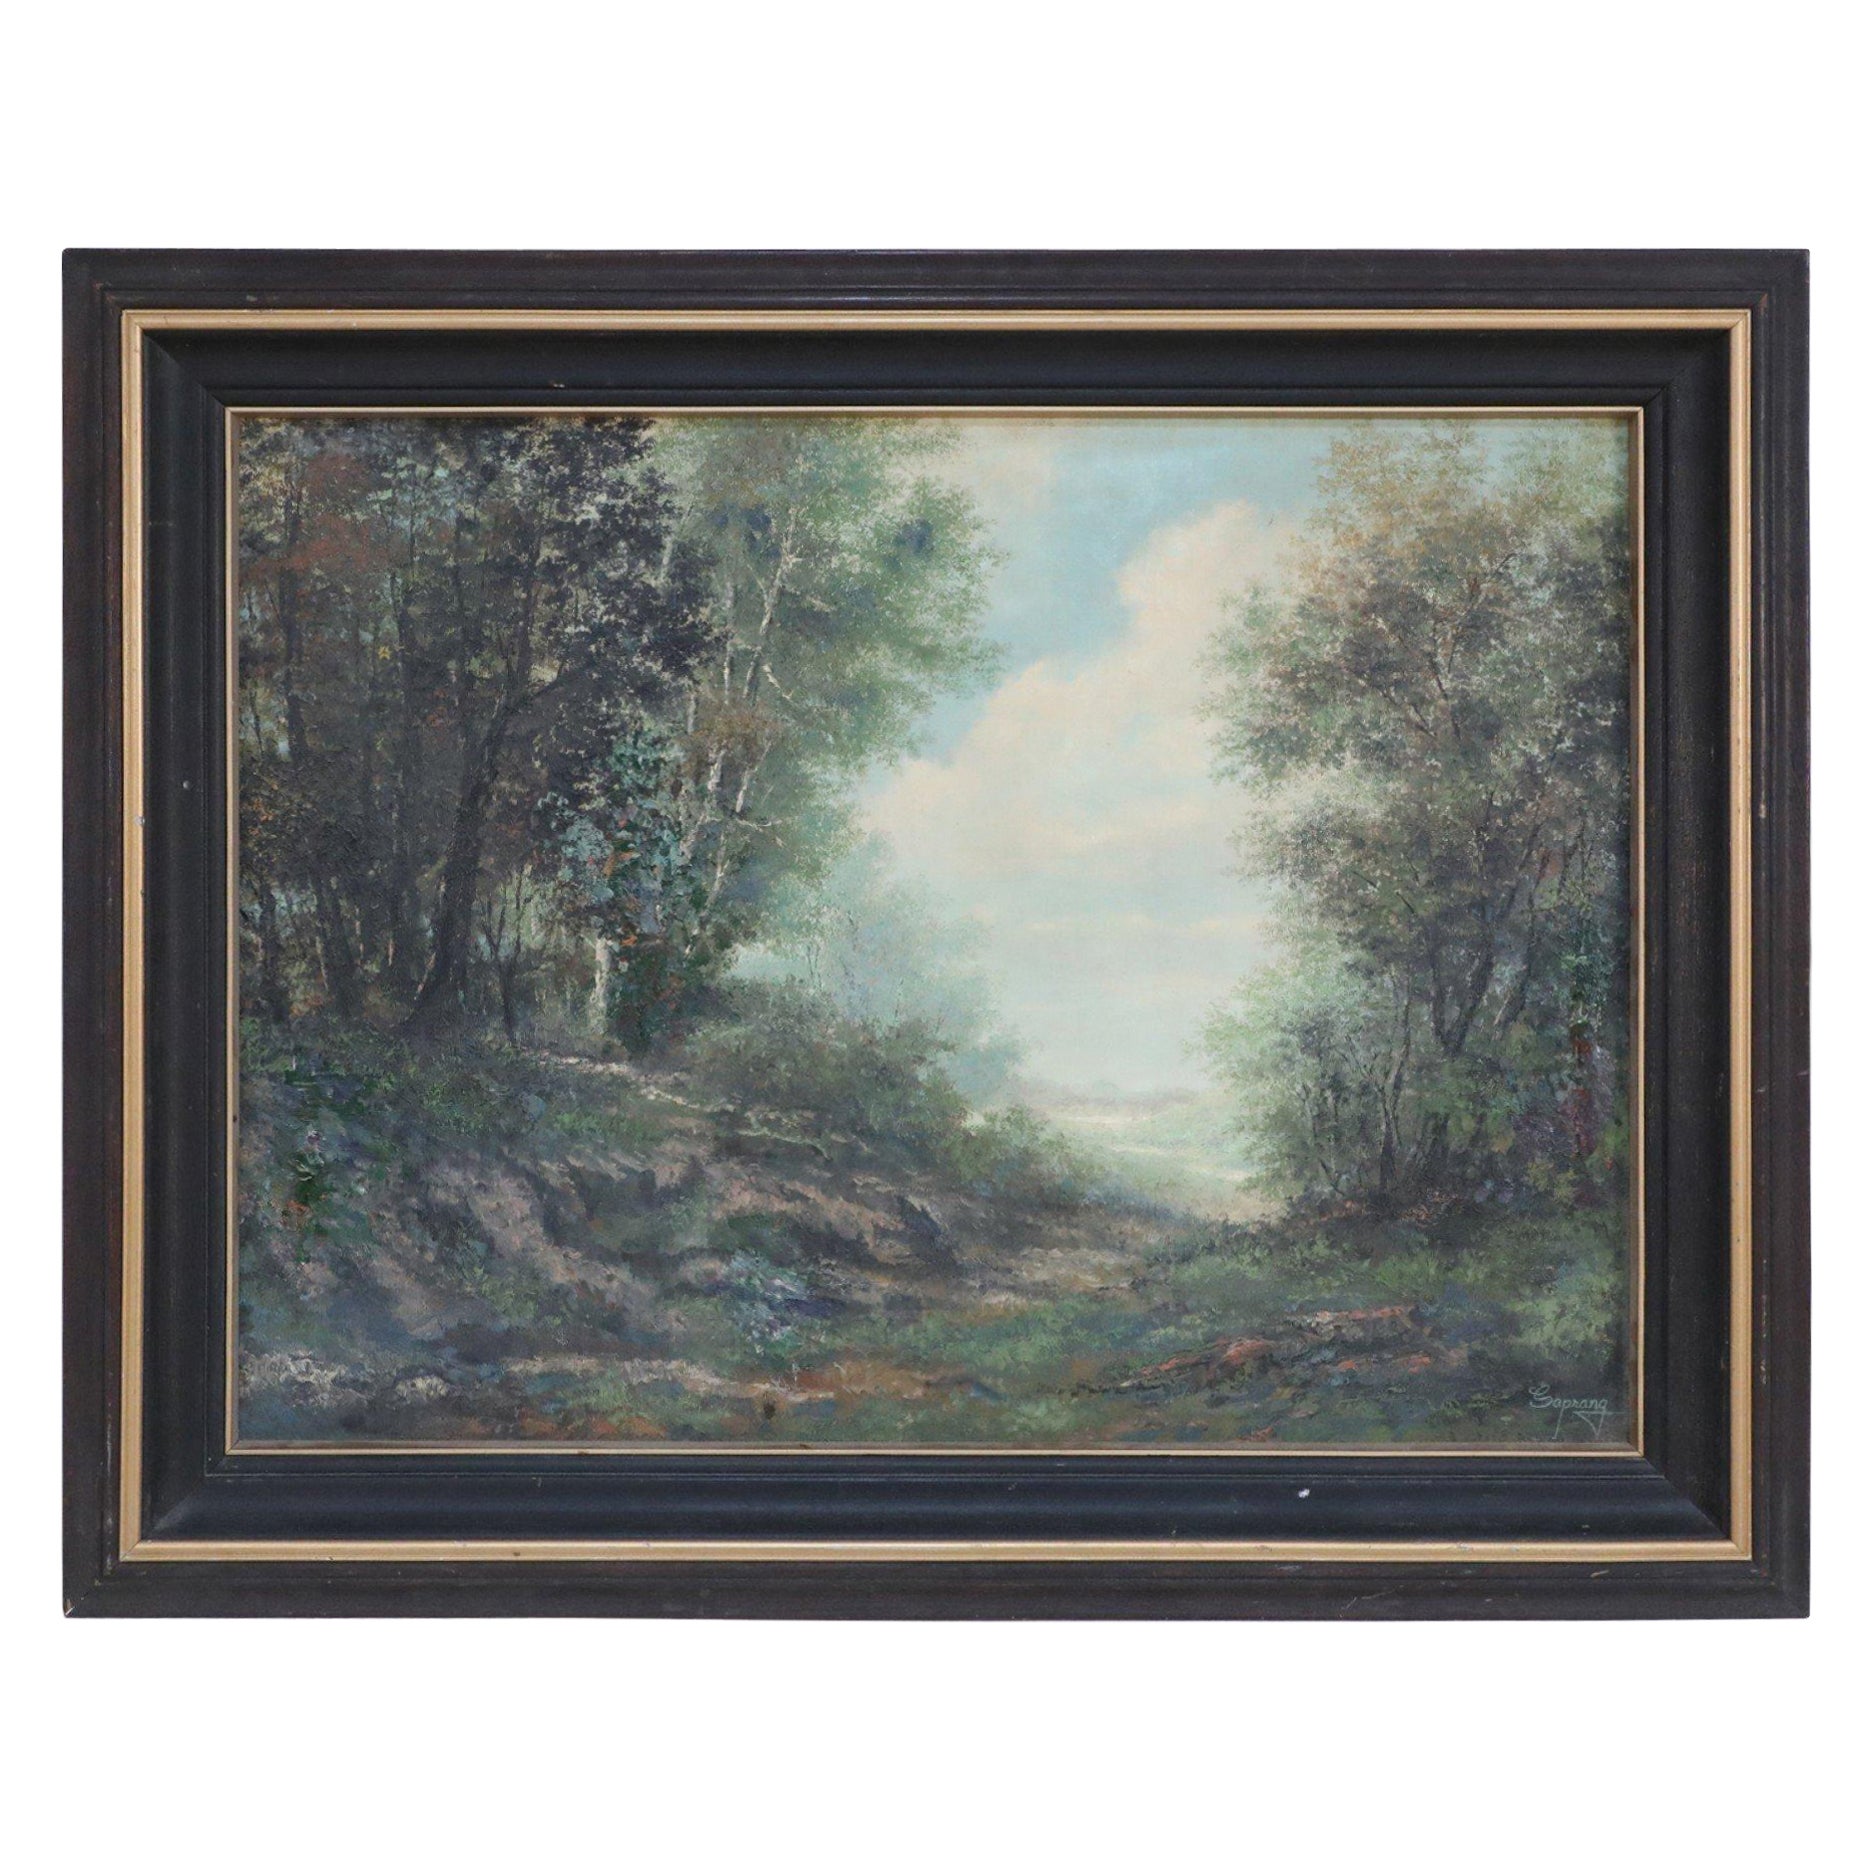 Framed Oil Landscape Painting of a Forest Path and Distant Mountains